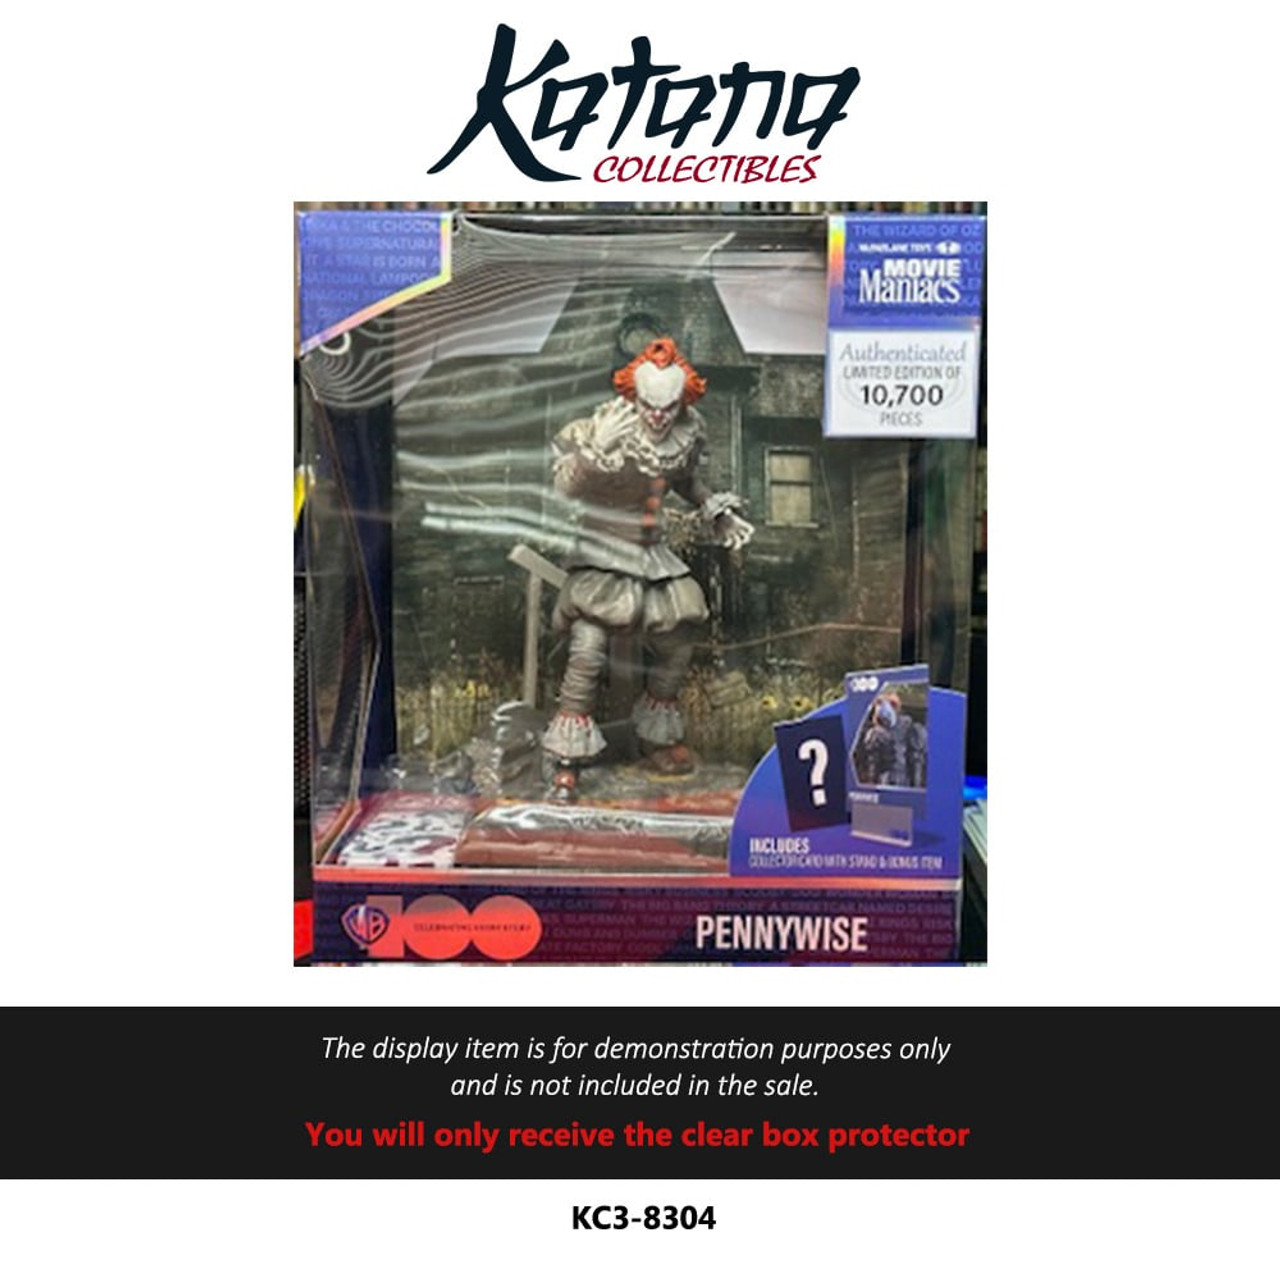 Katana Collectibles Protector For McFarlane Movie Maniacs Pennywise